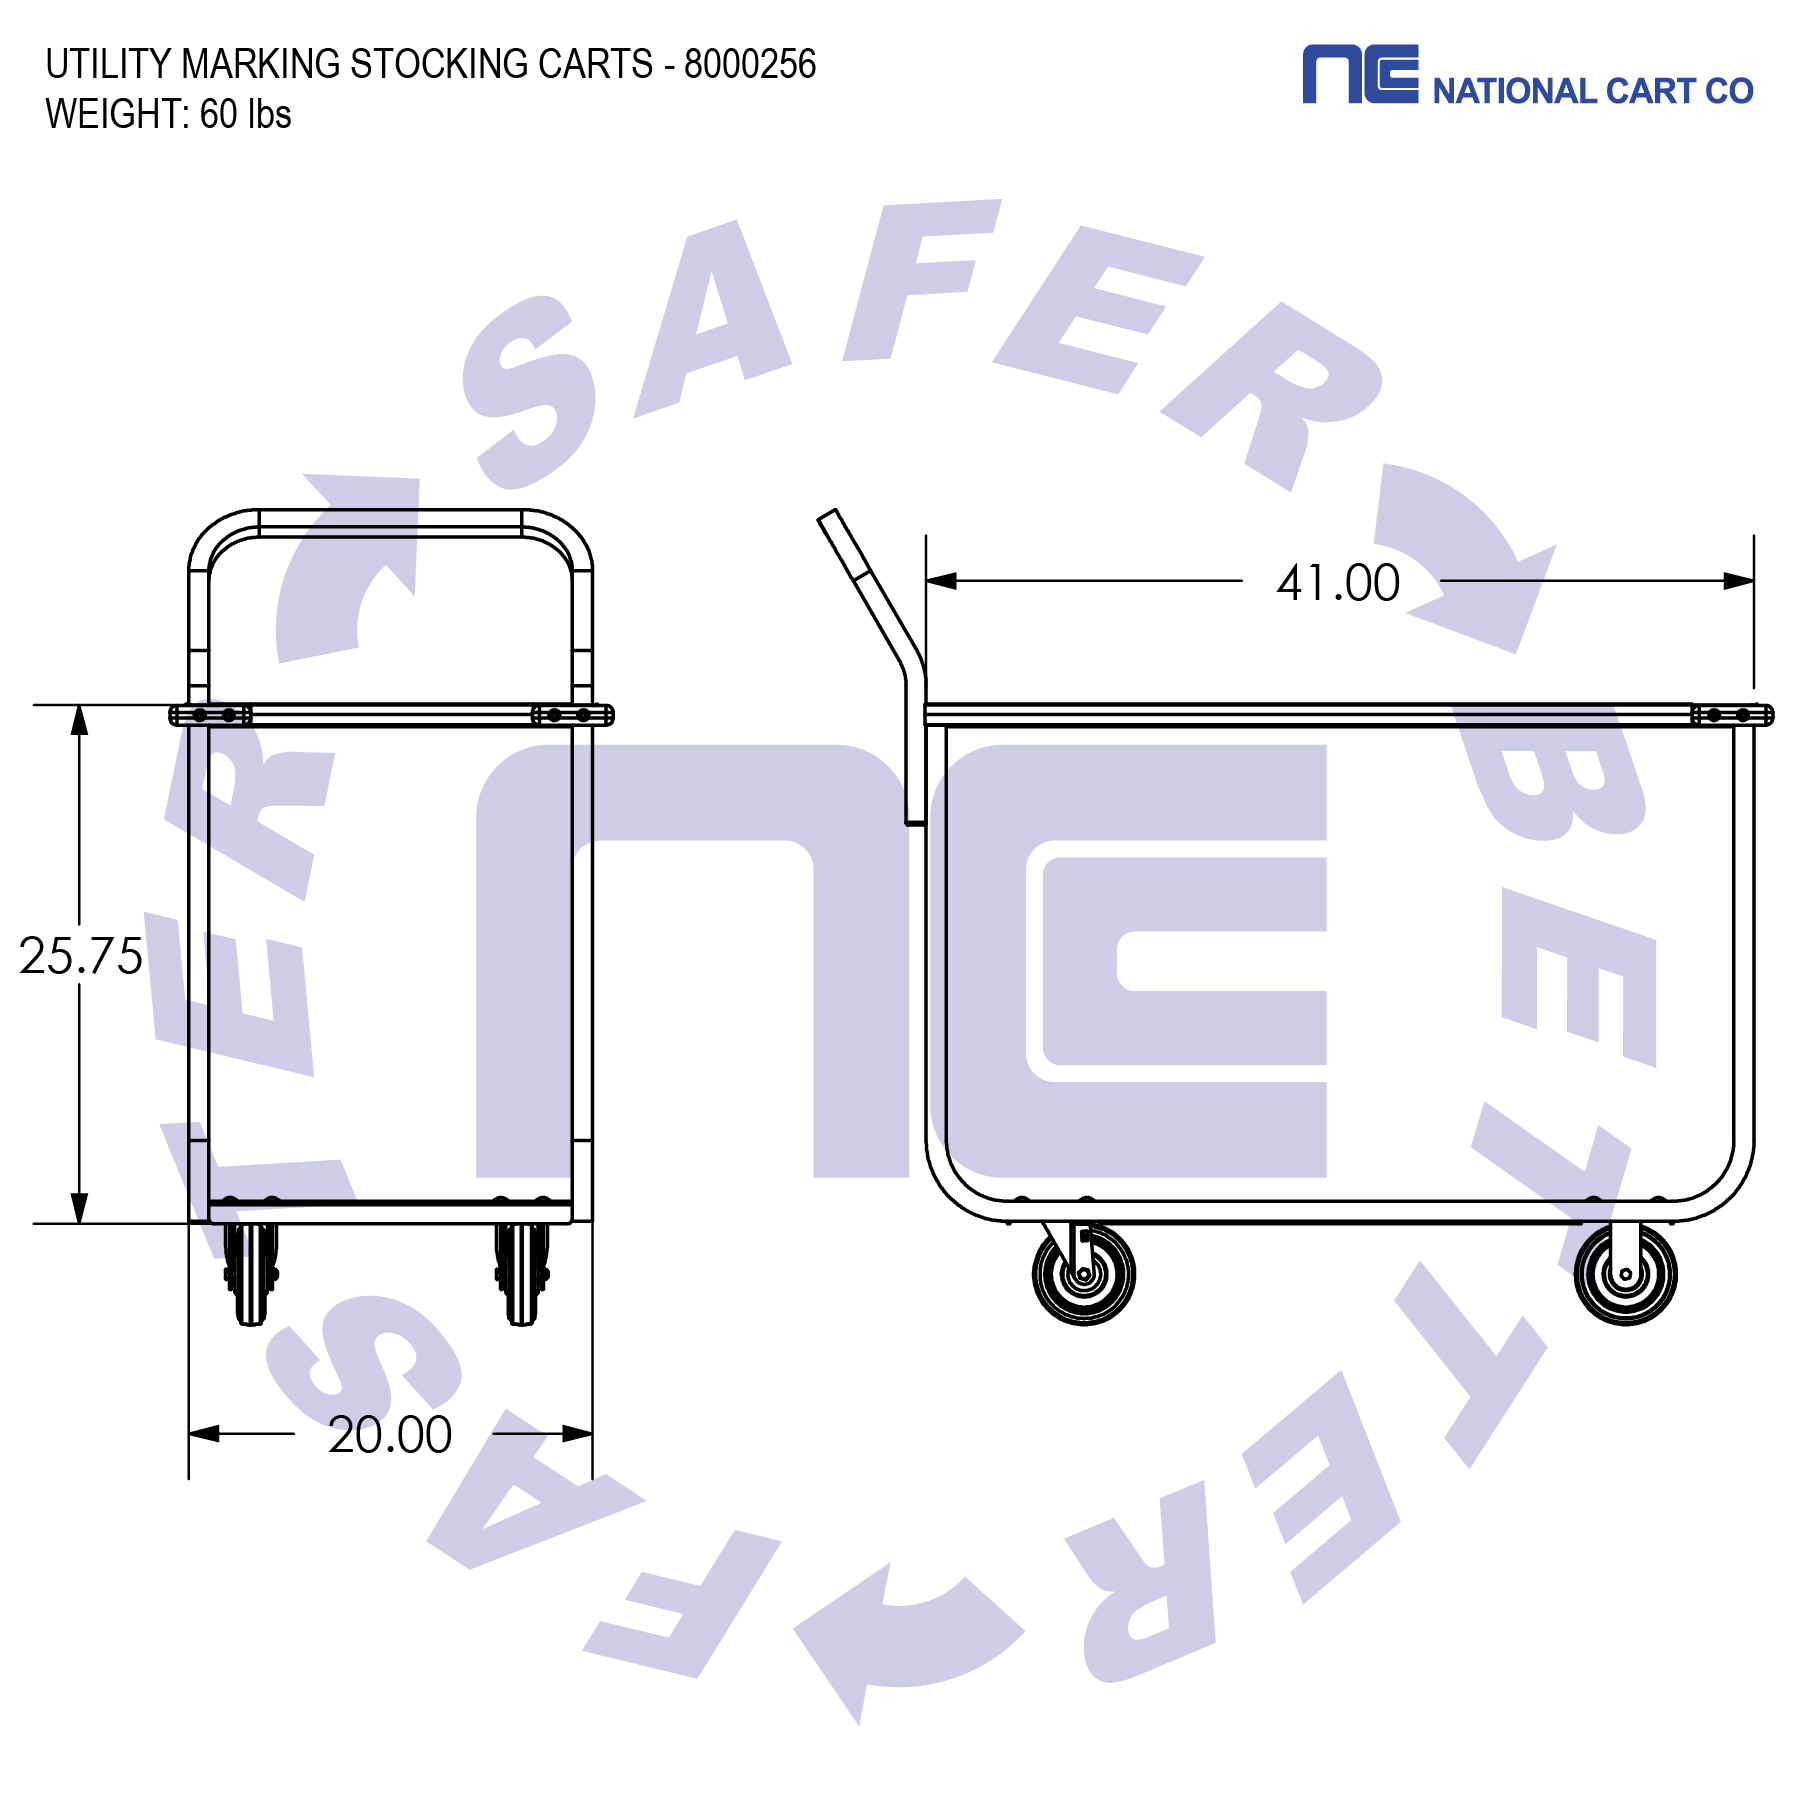 8000151_1 Utility Marking Stocking Carts nest dollies industrial cart nesting picking cart NSF cart NSF rack NSF approved NSF certified National Sanitation Foundation tray shelf Distribution Cart picking cart tray shelf picking cart, picking cart, ecom cart, ecommerce cart, ecommerce picking cart, picking cart, INDUSTRIAL CARTS, grocery cart grocery picking cart, department store cart, beverage cart NSF approved. This food service cart meets strict standards and procedures imposed by NSF. lug cart meat department, produce department bakery cart bakery rack bakery carts bakery racks meat rack meat cart sushi cart salad bar cart deli cart stream table cart buffet cart